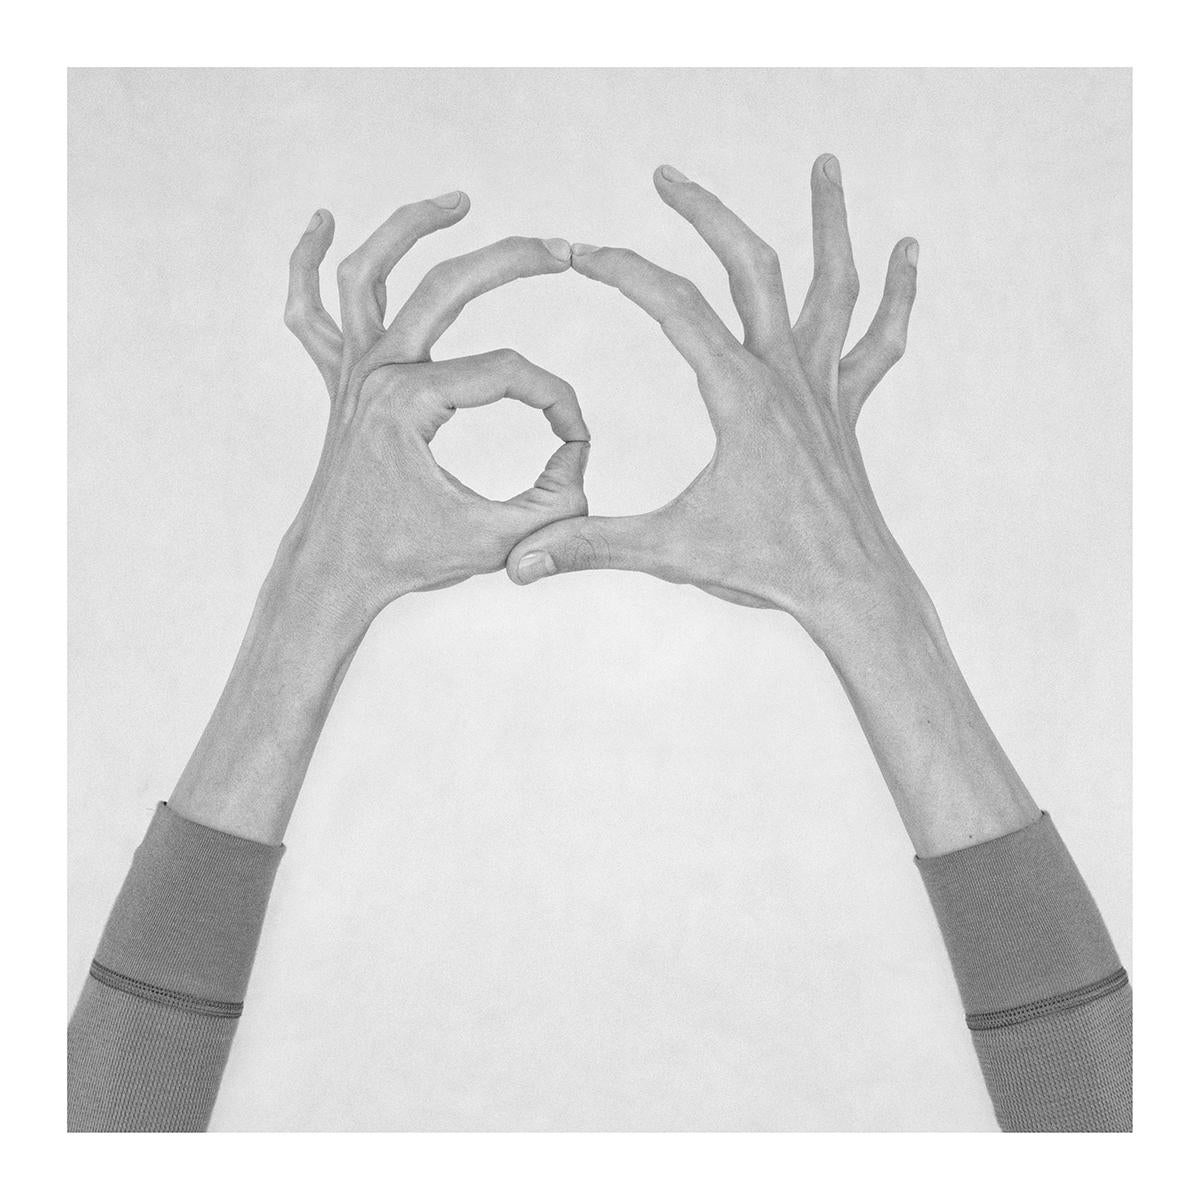 Nico Baixas / Gos-com-fuig Black and White Photograph - Untitled VIII. From the Series Chiromorphose.  Hands.  Black & White Photography